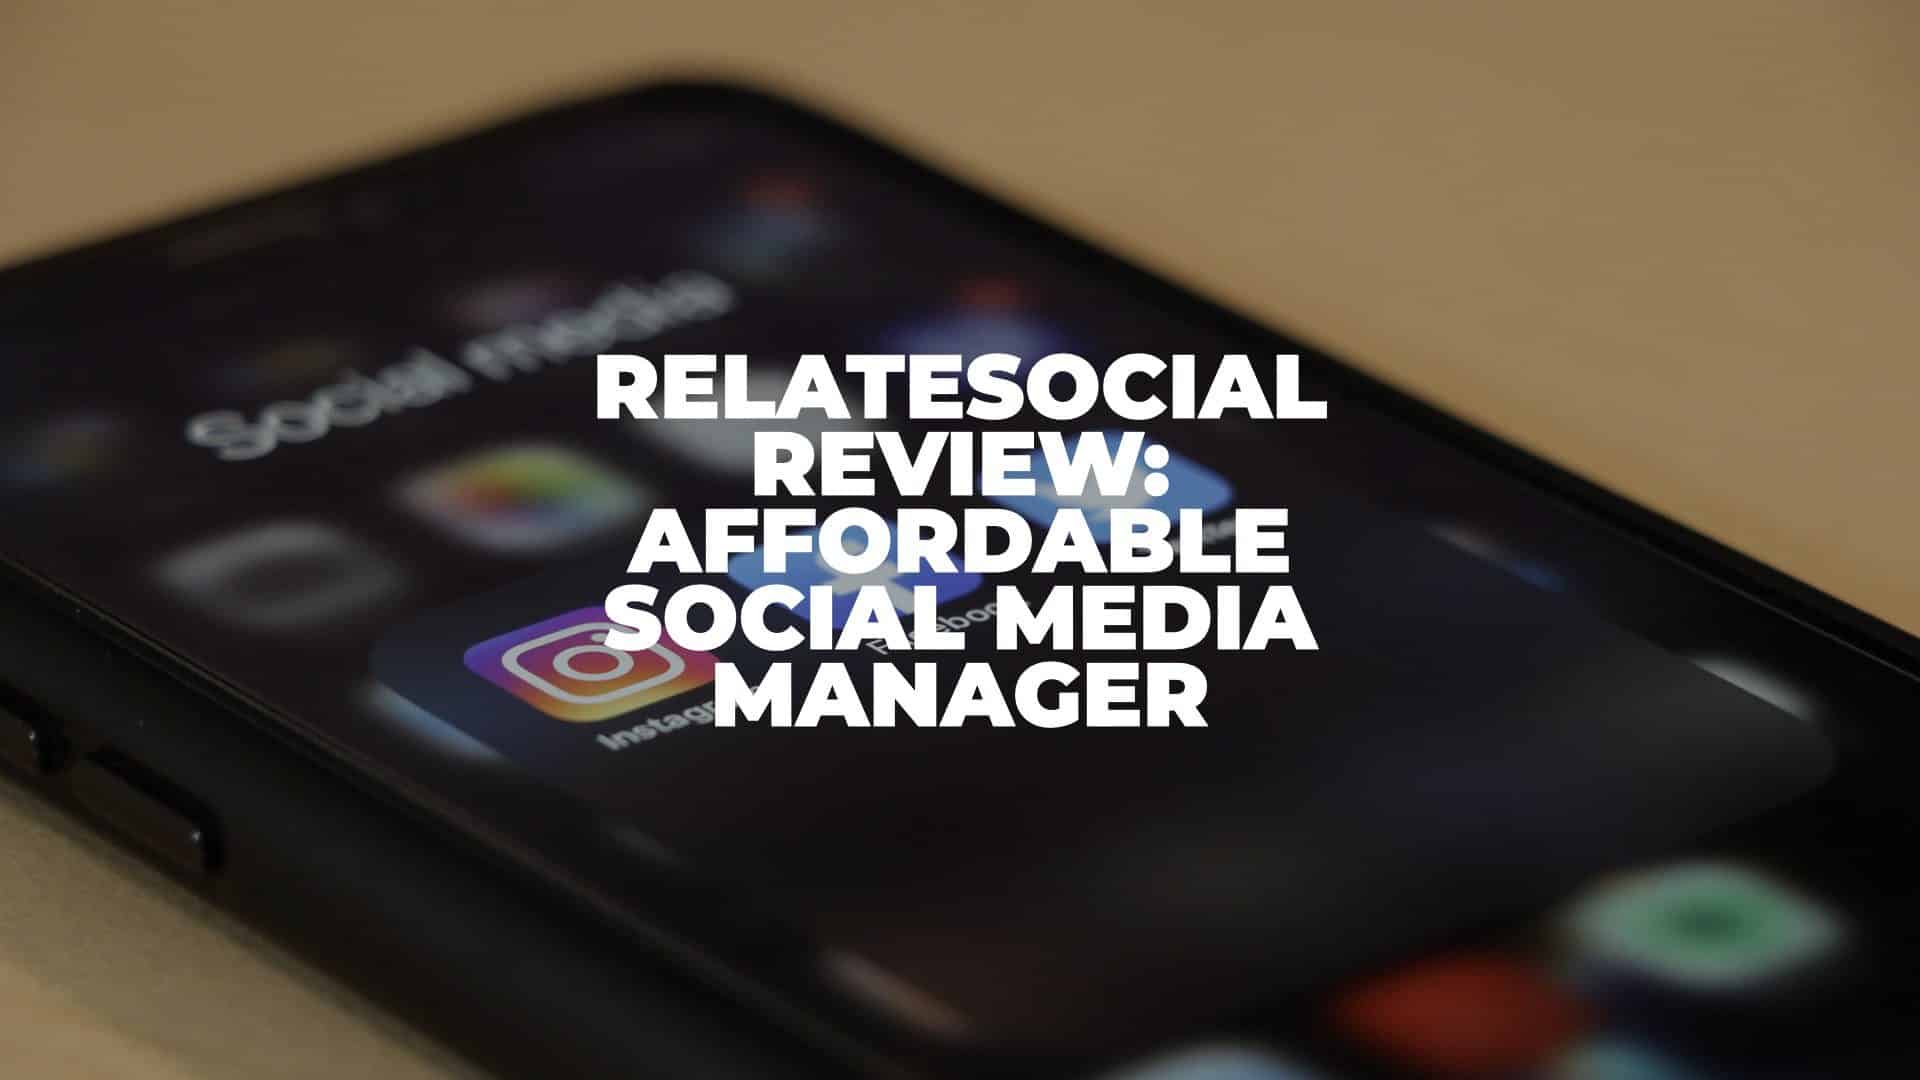 RelateSocial Review - Featured Image